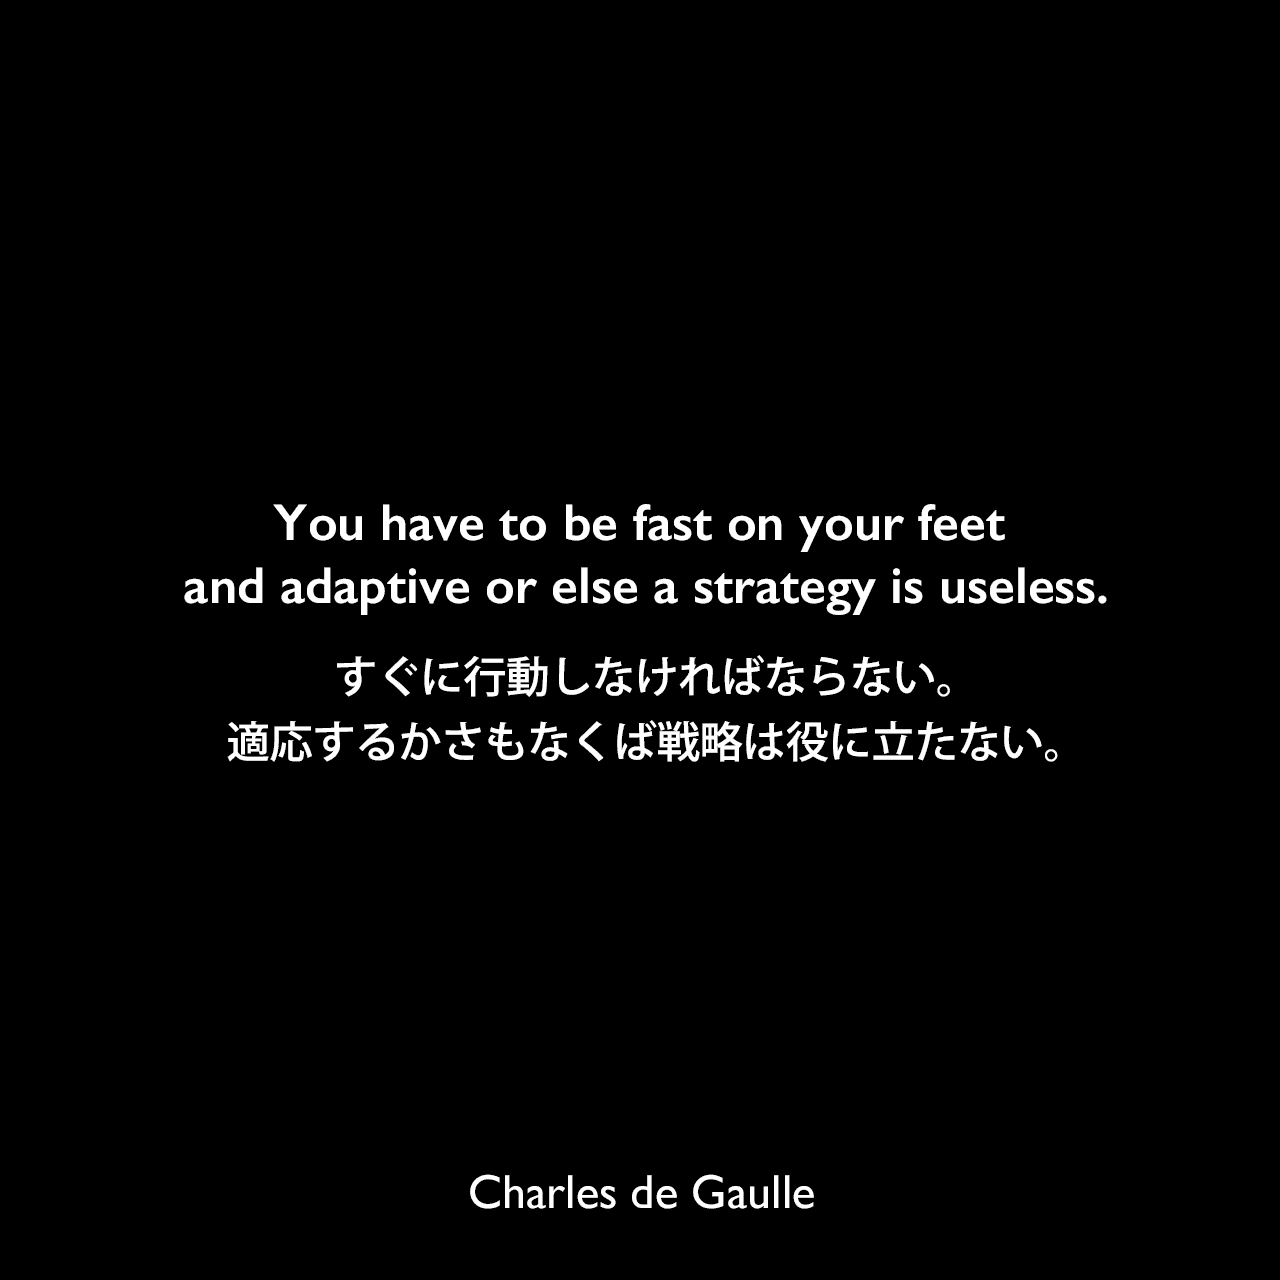 You have to be fast on your feet and adaptive or else a strategy is useless.すぐに行動しなければならない。適応するかさもなくば戦略は役に立たない。Charles de Gaulle